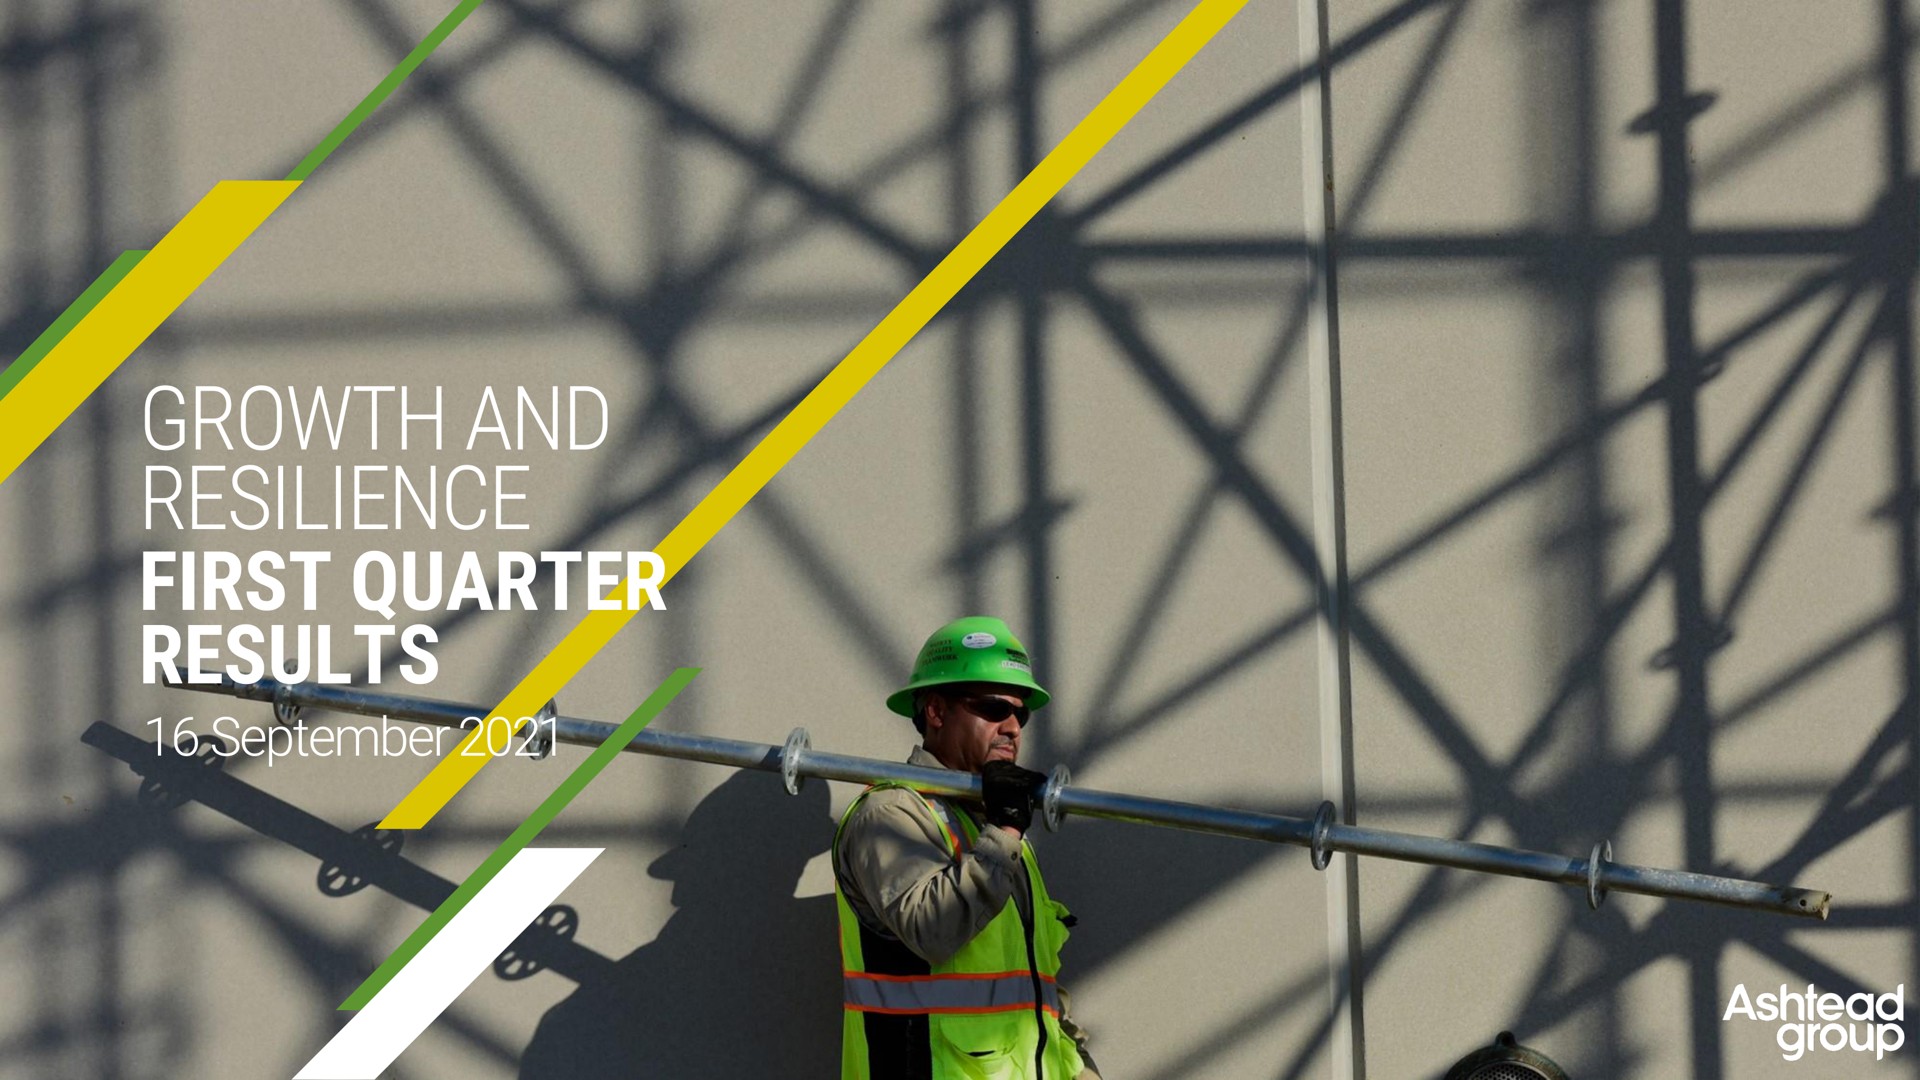 growth and resilience first quarter results | Ashtead Group